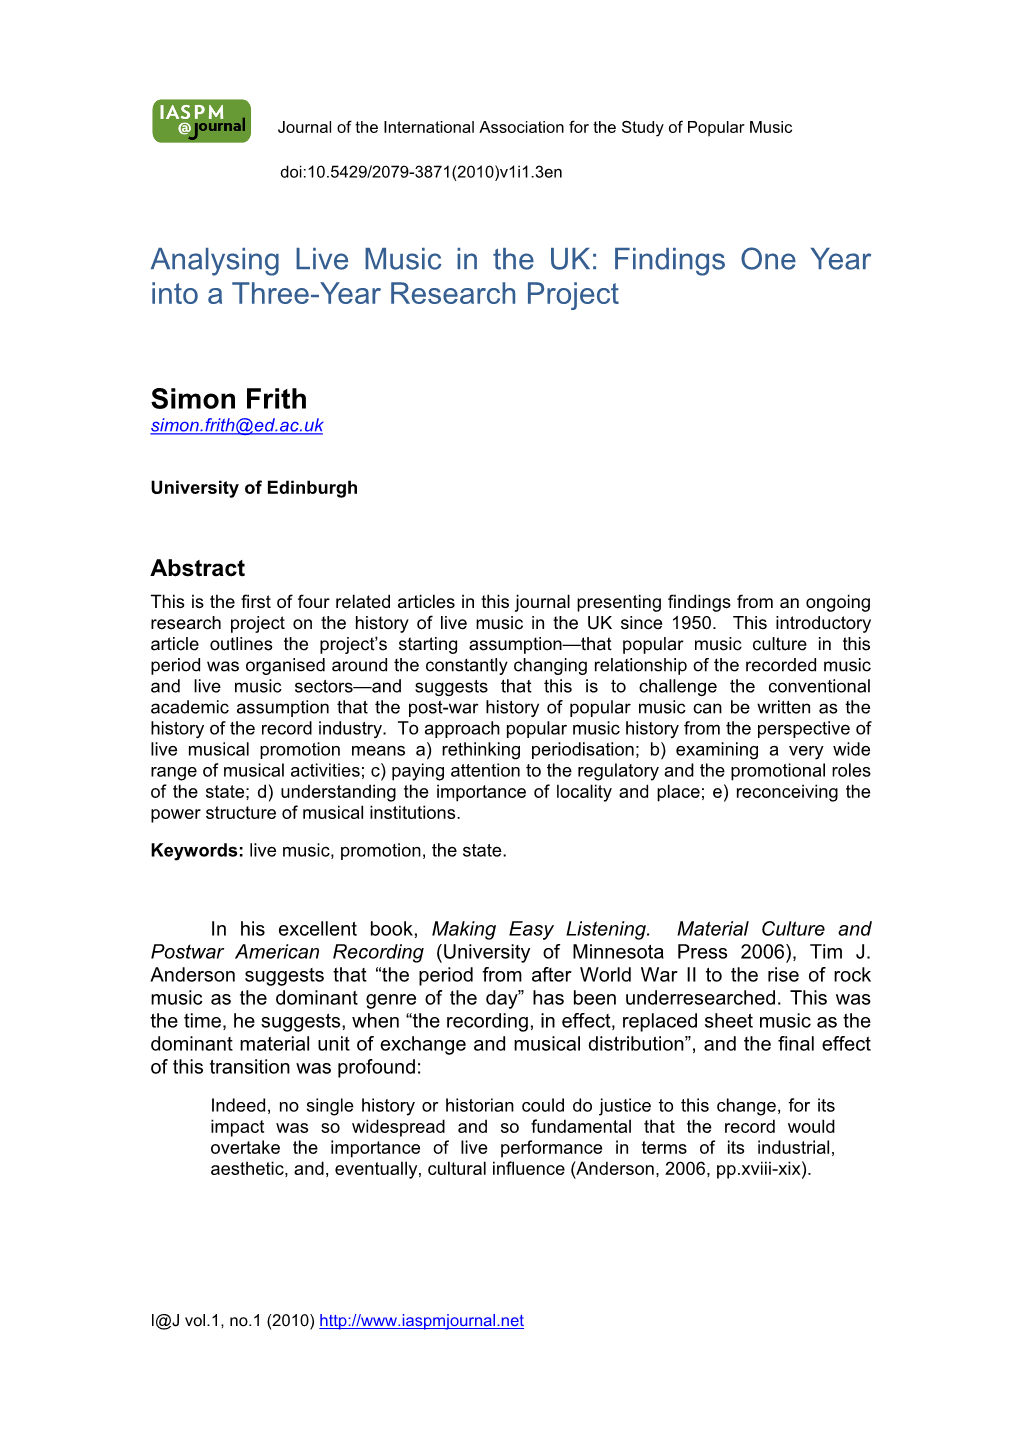 Analysing Live Music in the UK: Findings One Year Into a Three-Year Research Project